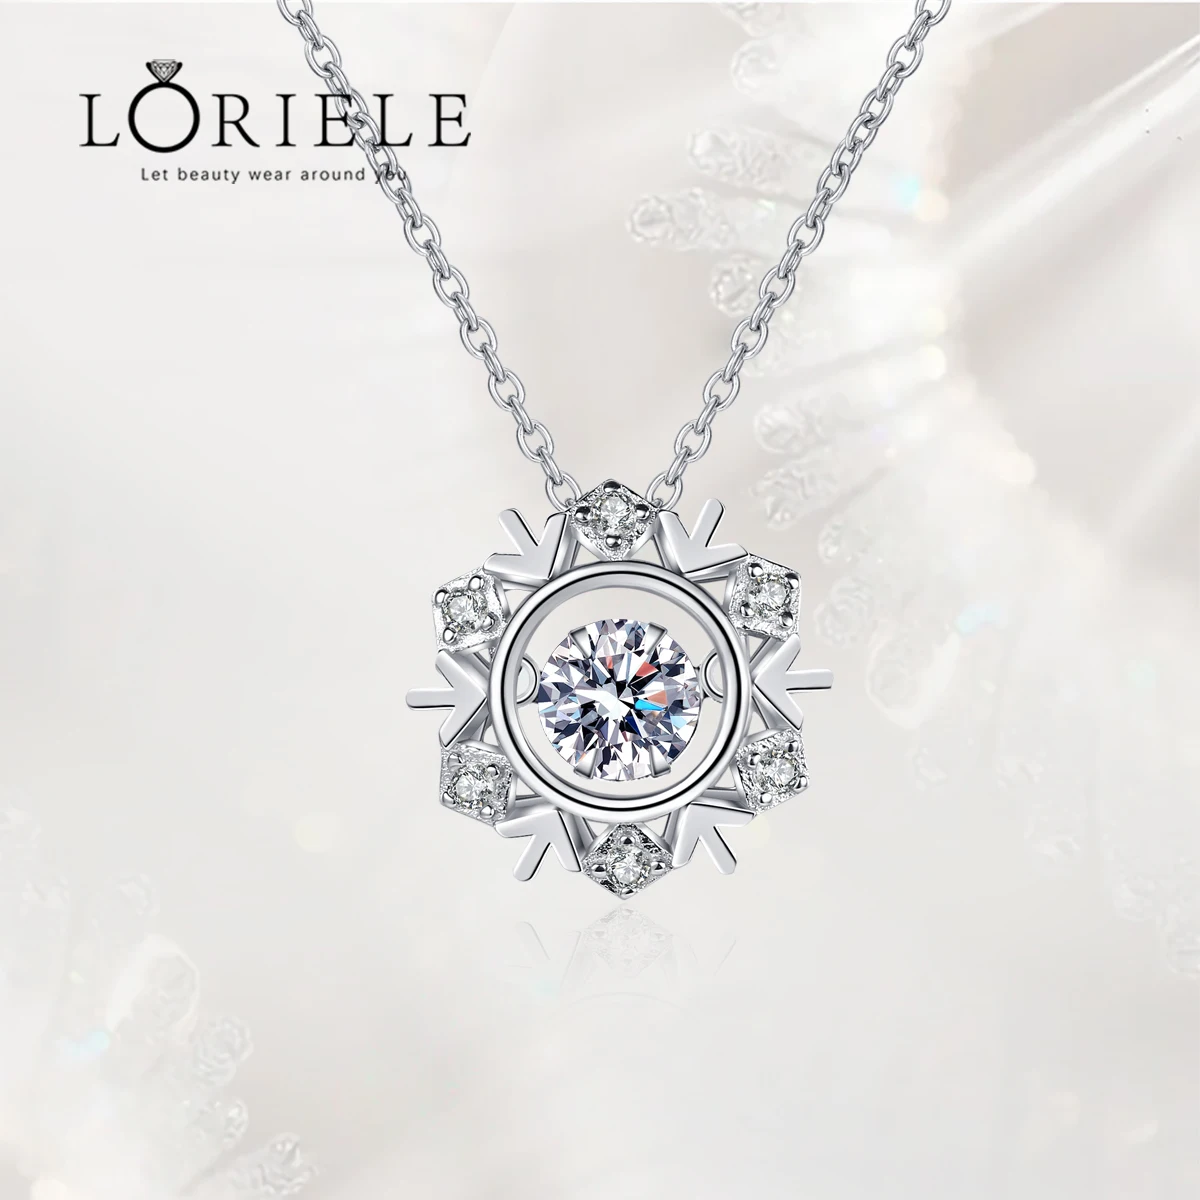 

LORIELE Real Moissanite Flower Necklace 14K Gold Plated Sterling Silver Necklace for Women VVS Diamond Snowflake Pendant Jewelry